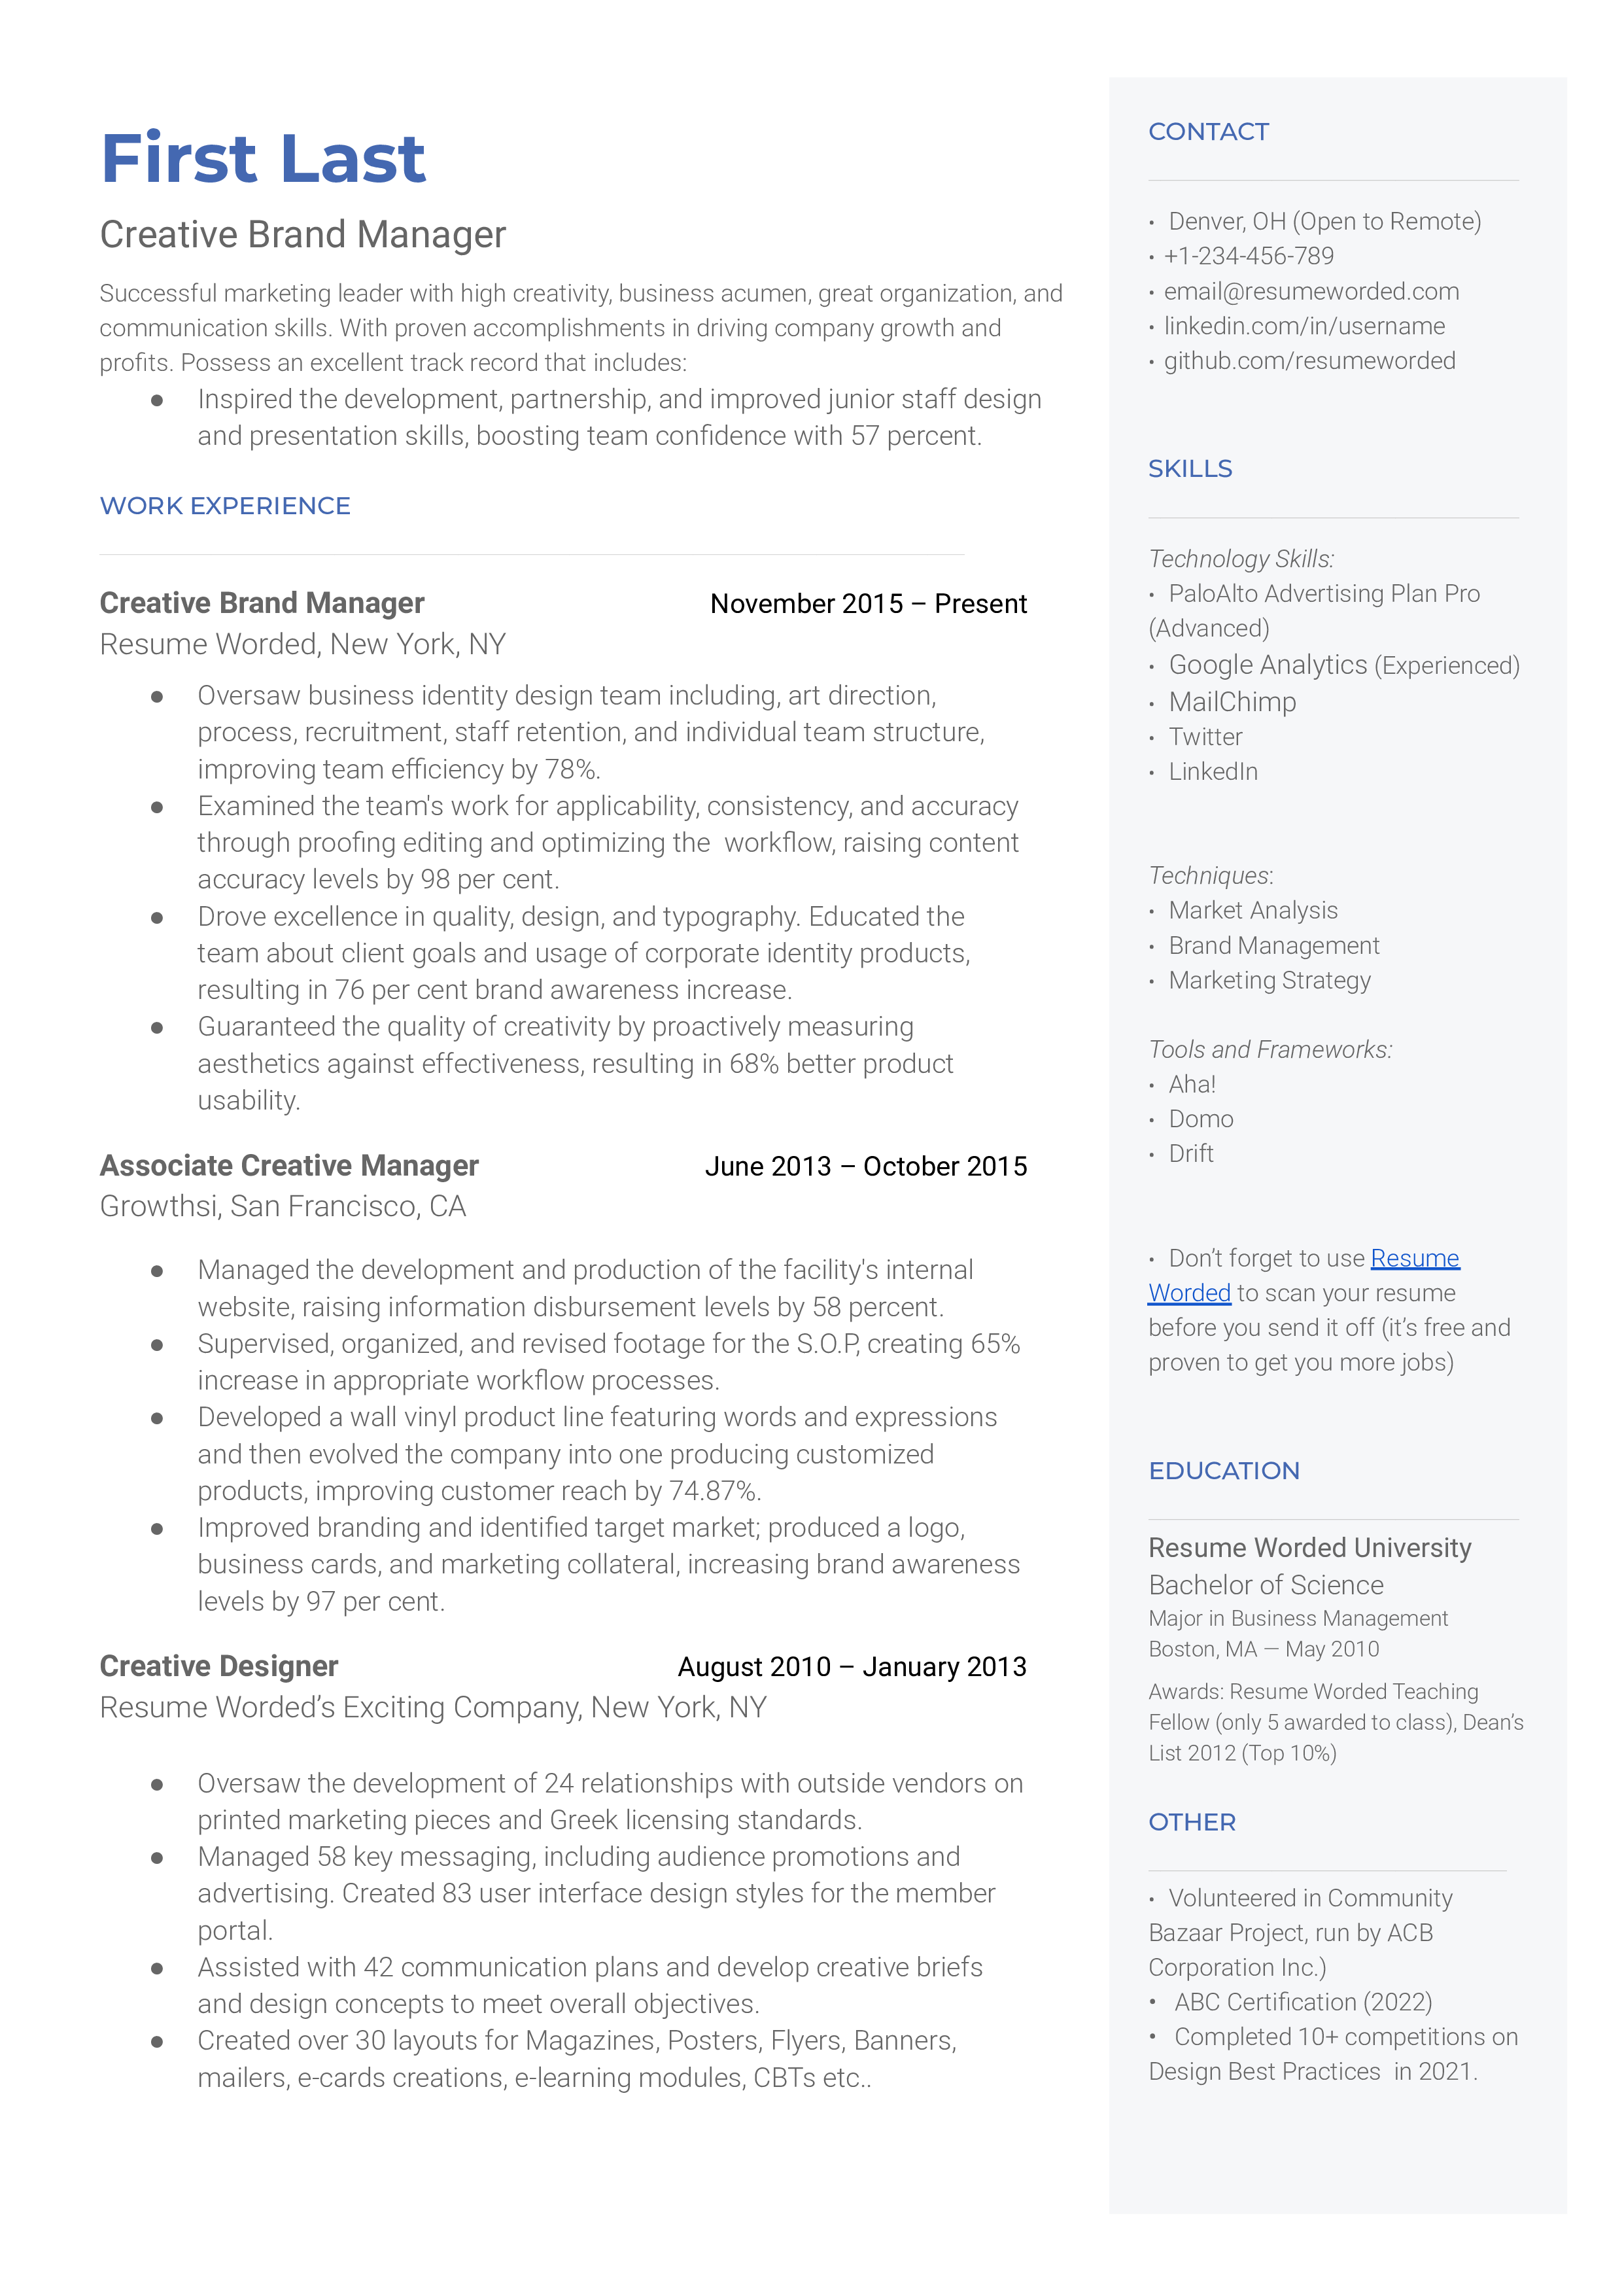 Screenshot of a well-structured CV for a Creative Brand Manager role.